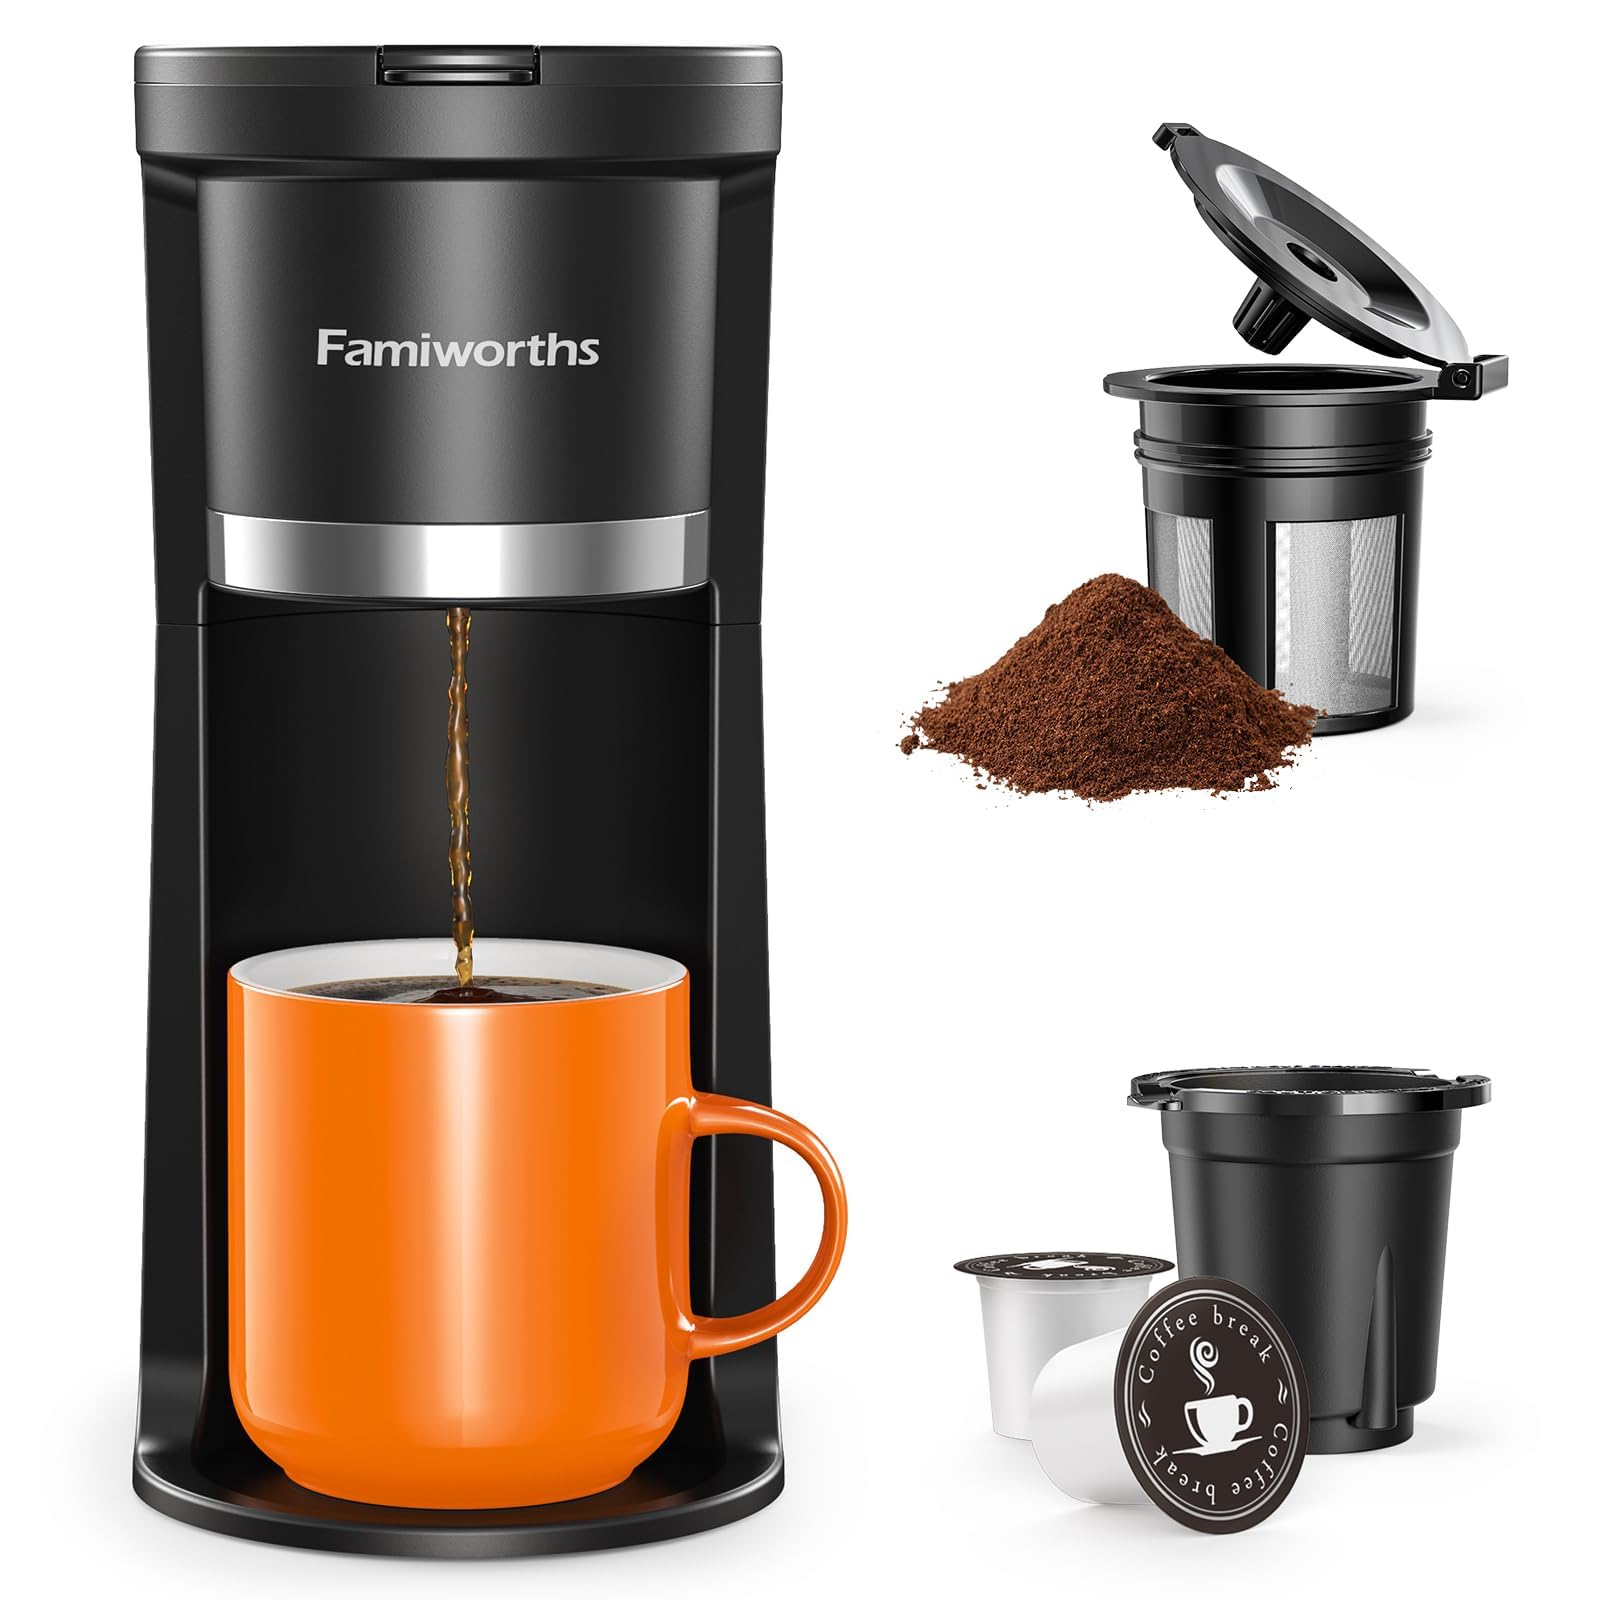 Mini Coffee Maker Single Serve and Descaling Reminder